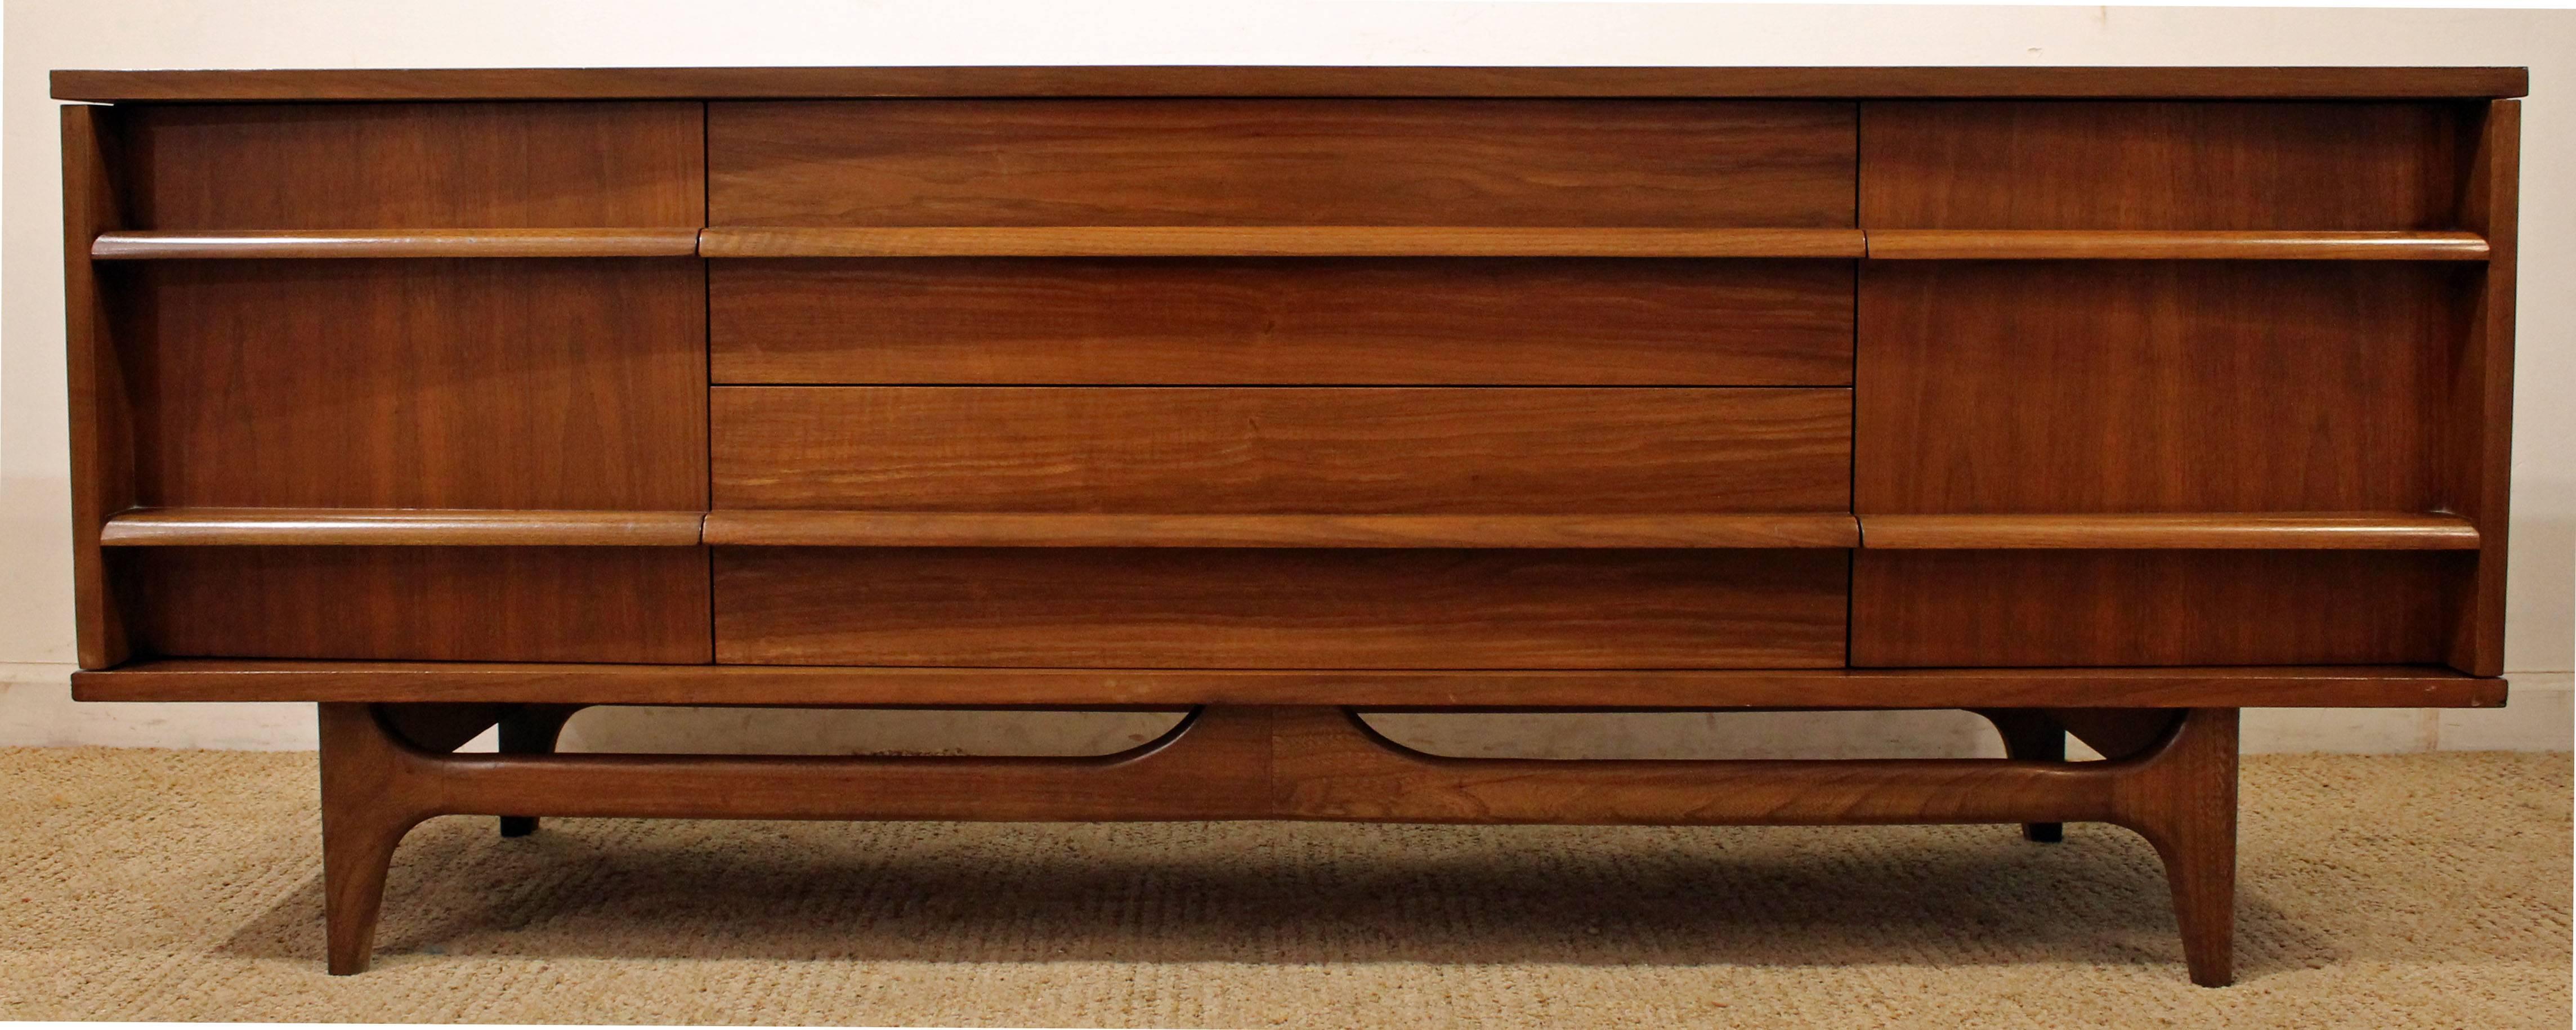 This piece is made of walnut, featuring a curved front, two doors on either side and three center drawers with sculpted pulls. It has been refinished.

Dimensions: 
64